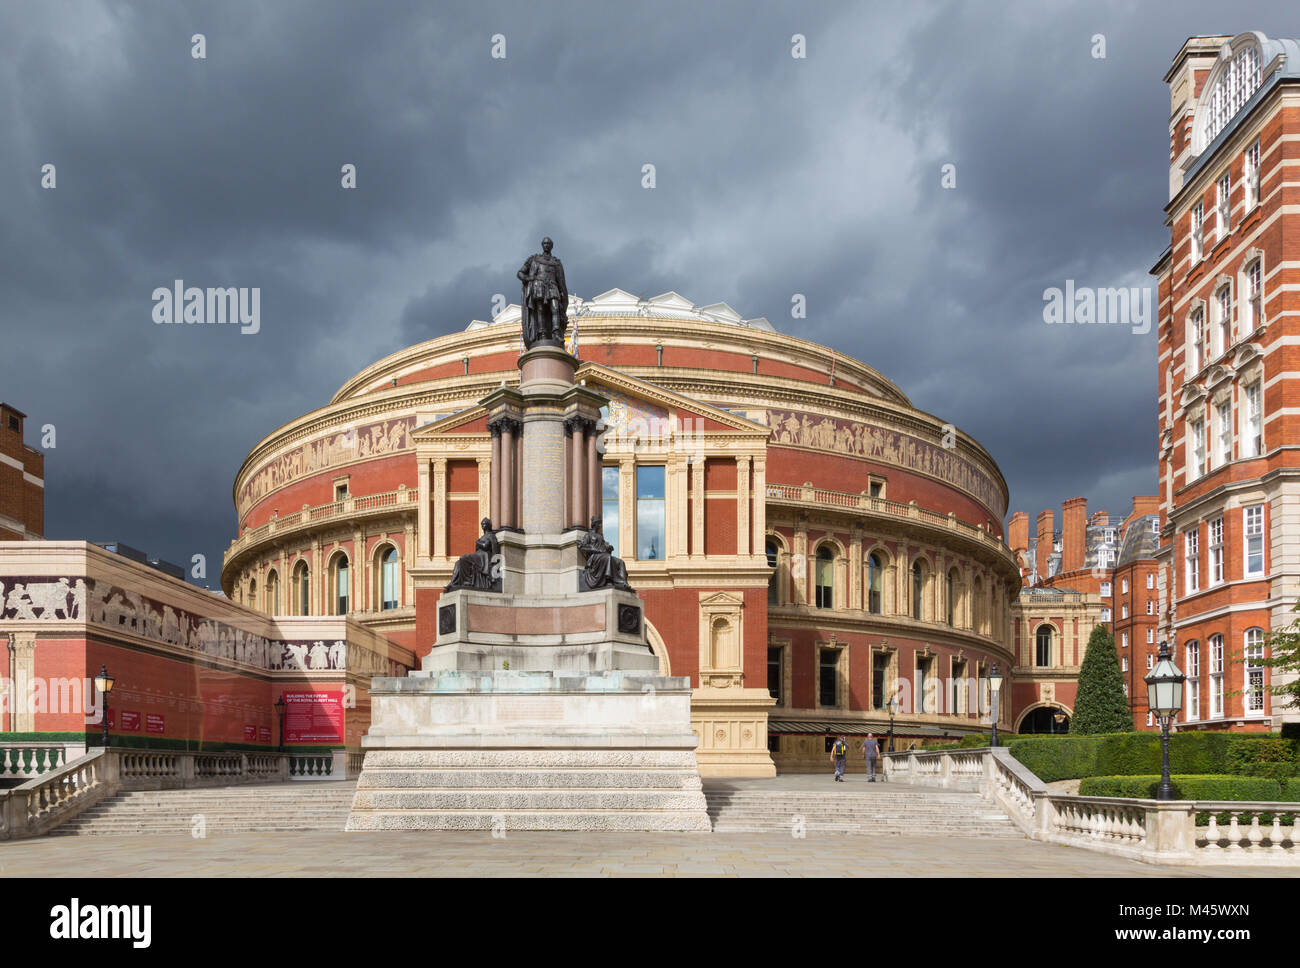 London - The Albert hall and The Memorial to the Great Exhibition by John Durham from year 1851. Stock Photo